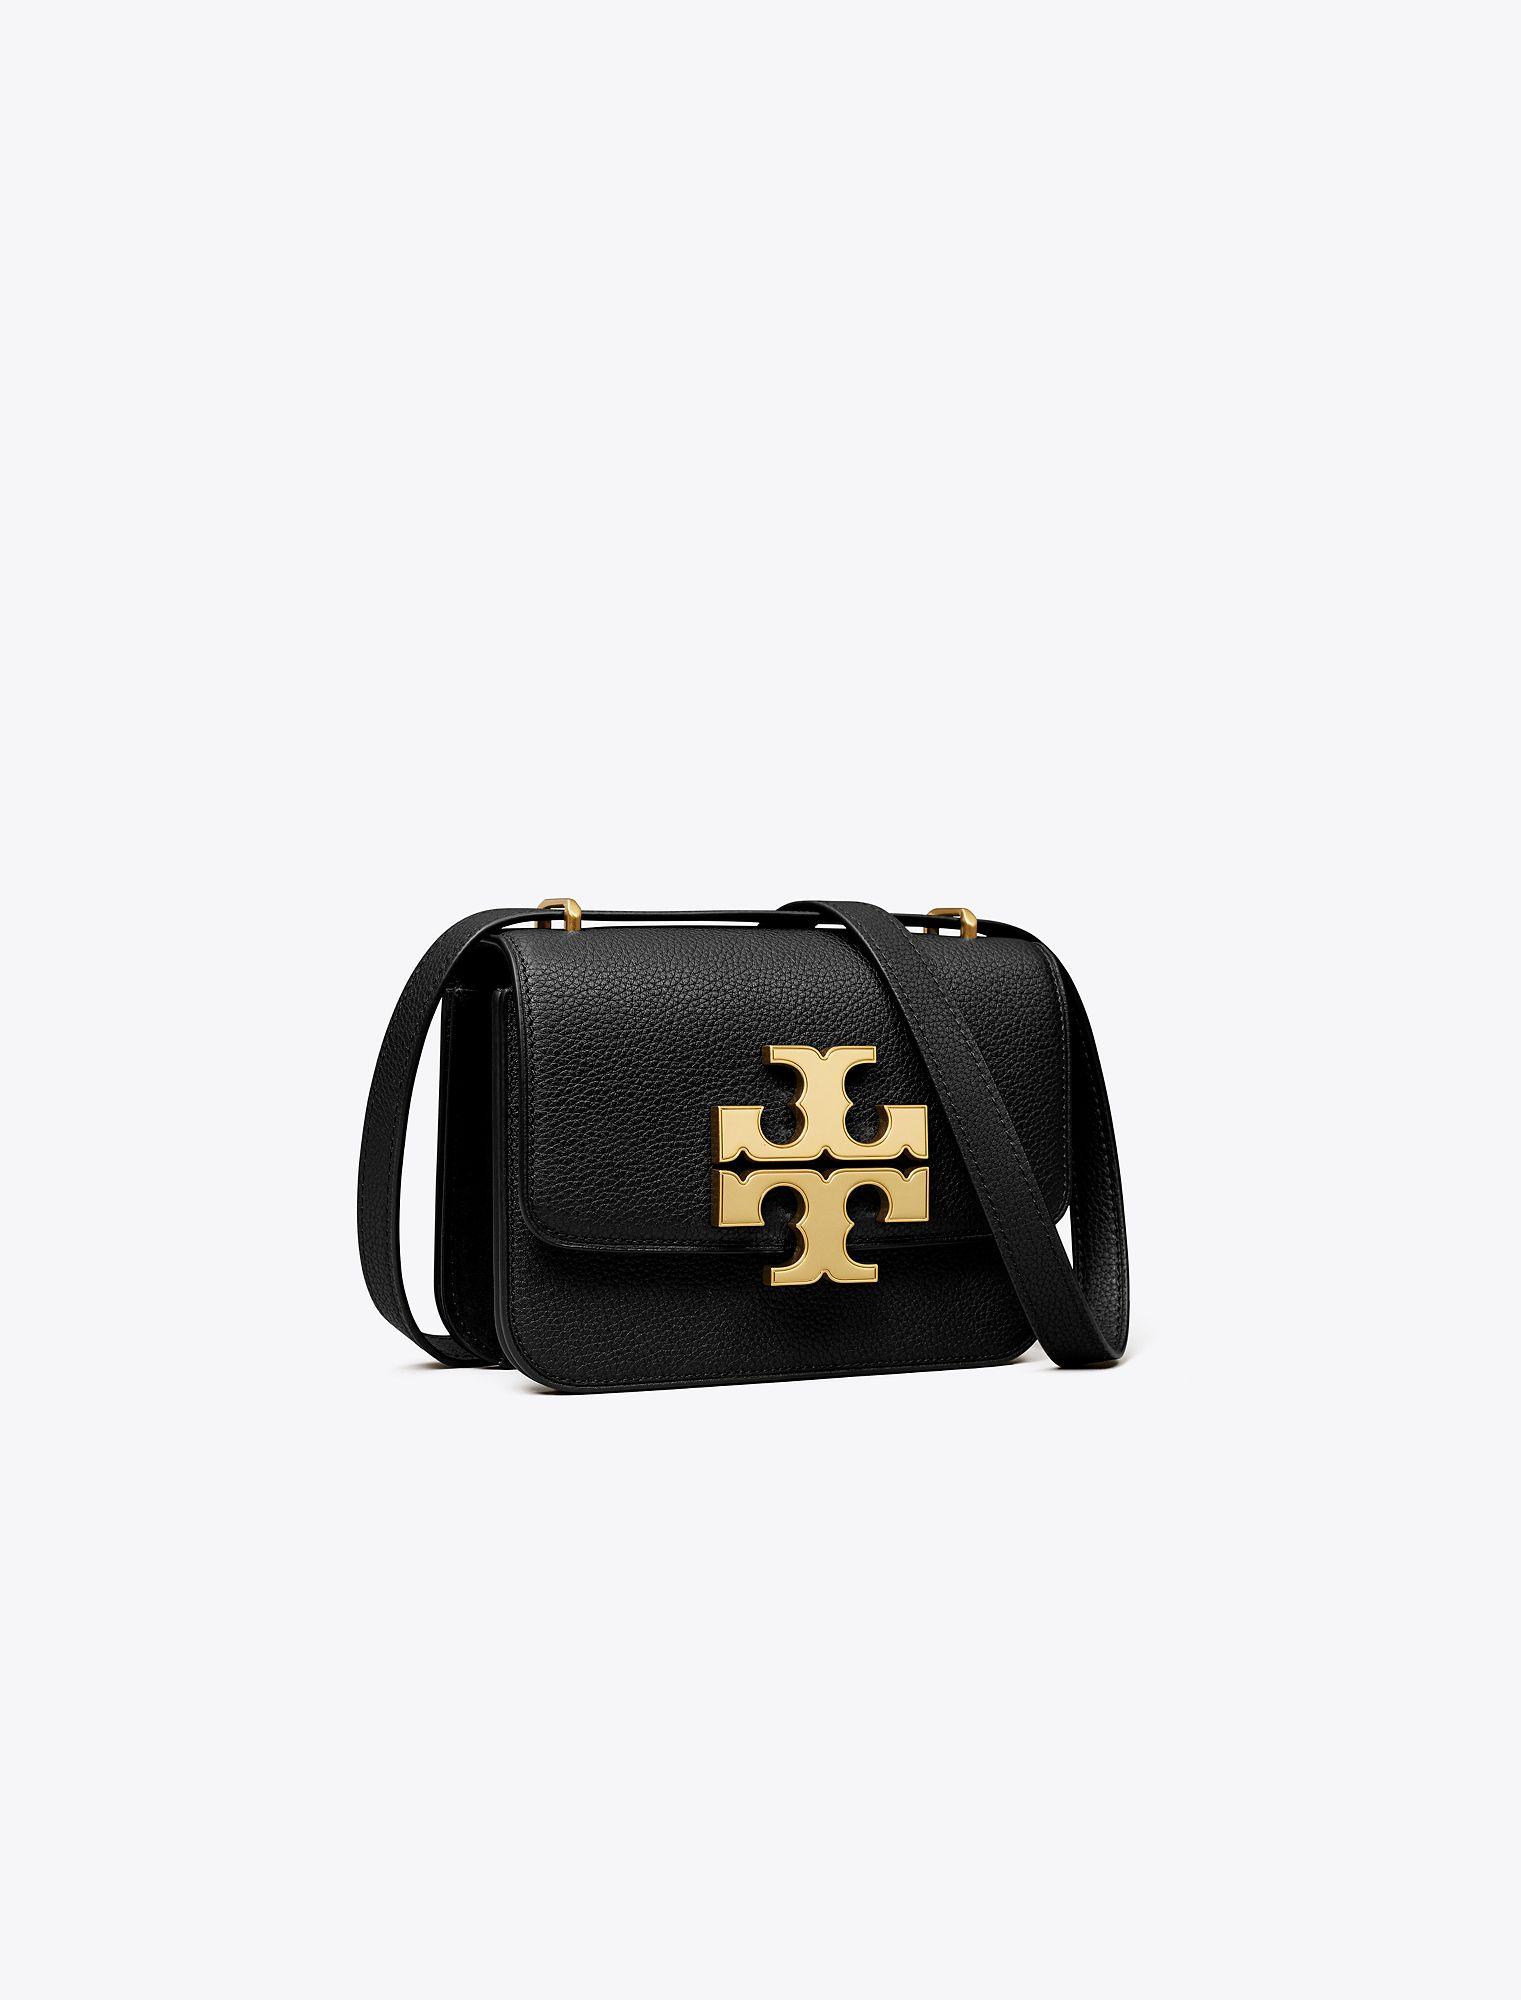 Tory Burch Small Eleanor Convertible Shoulder Bag in Black | Lyst